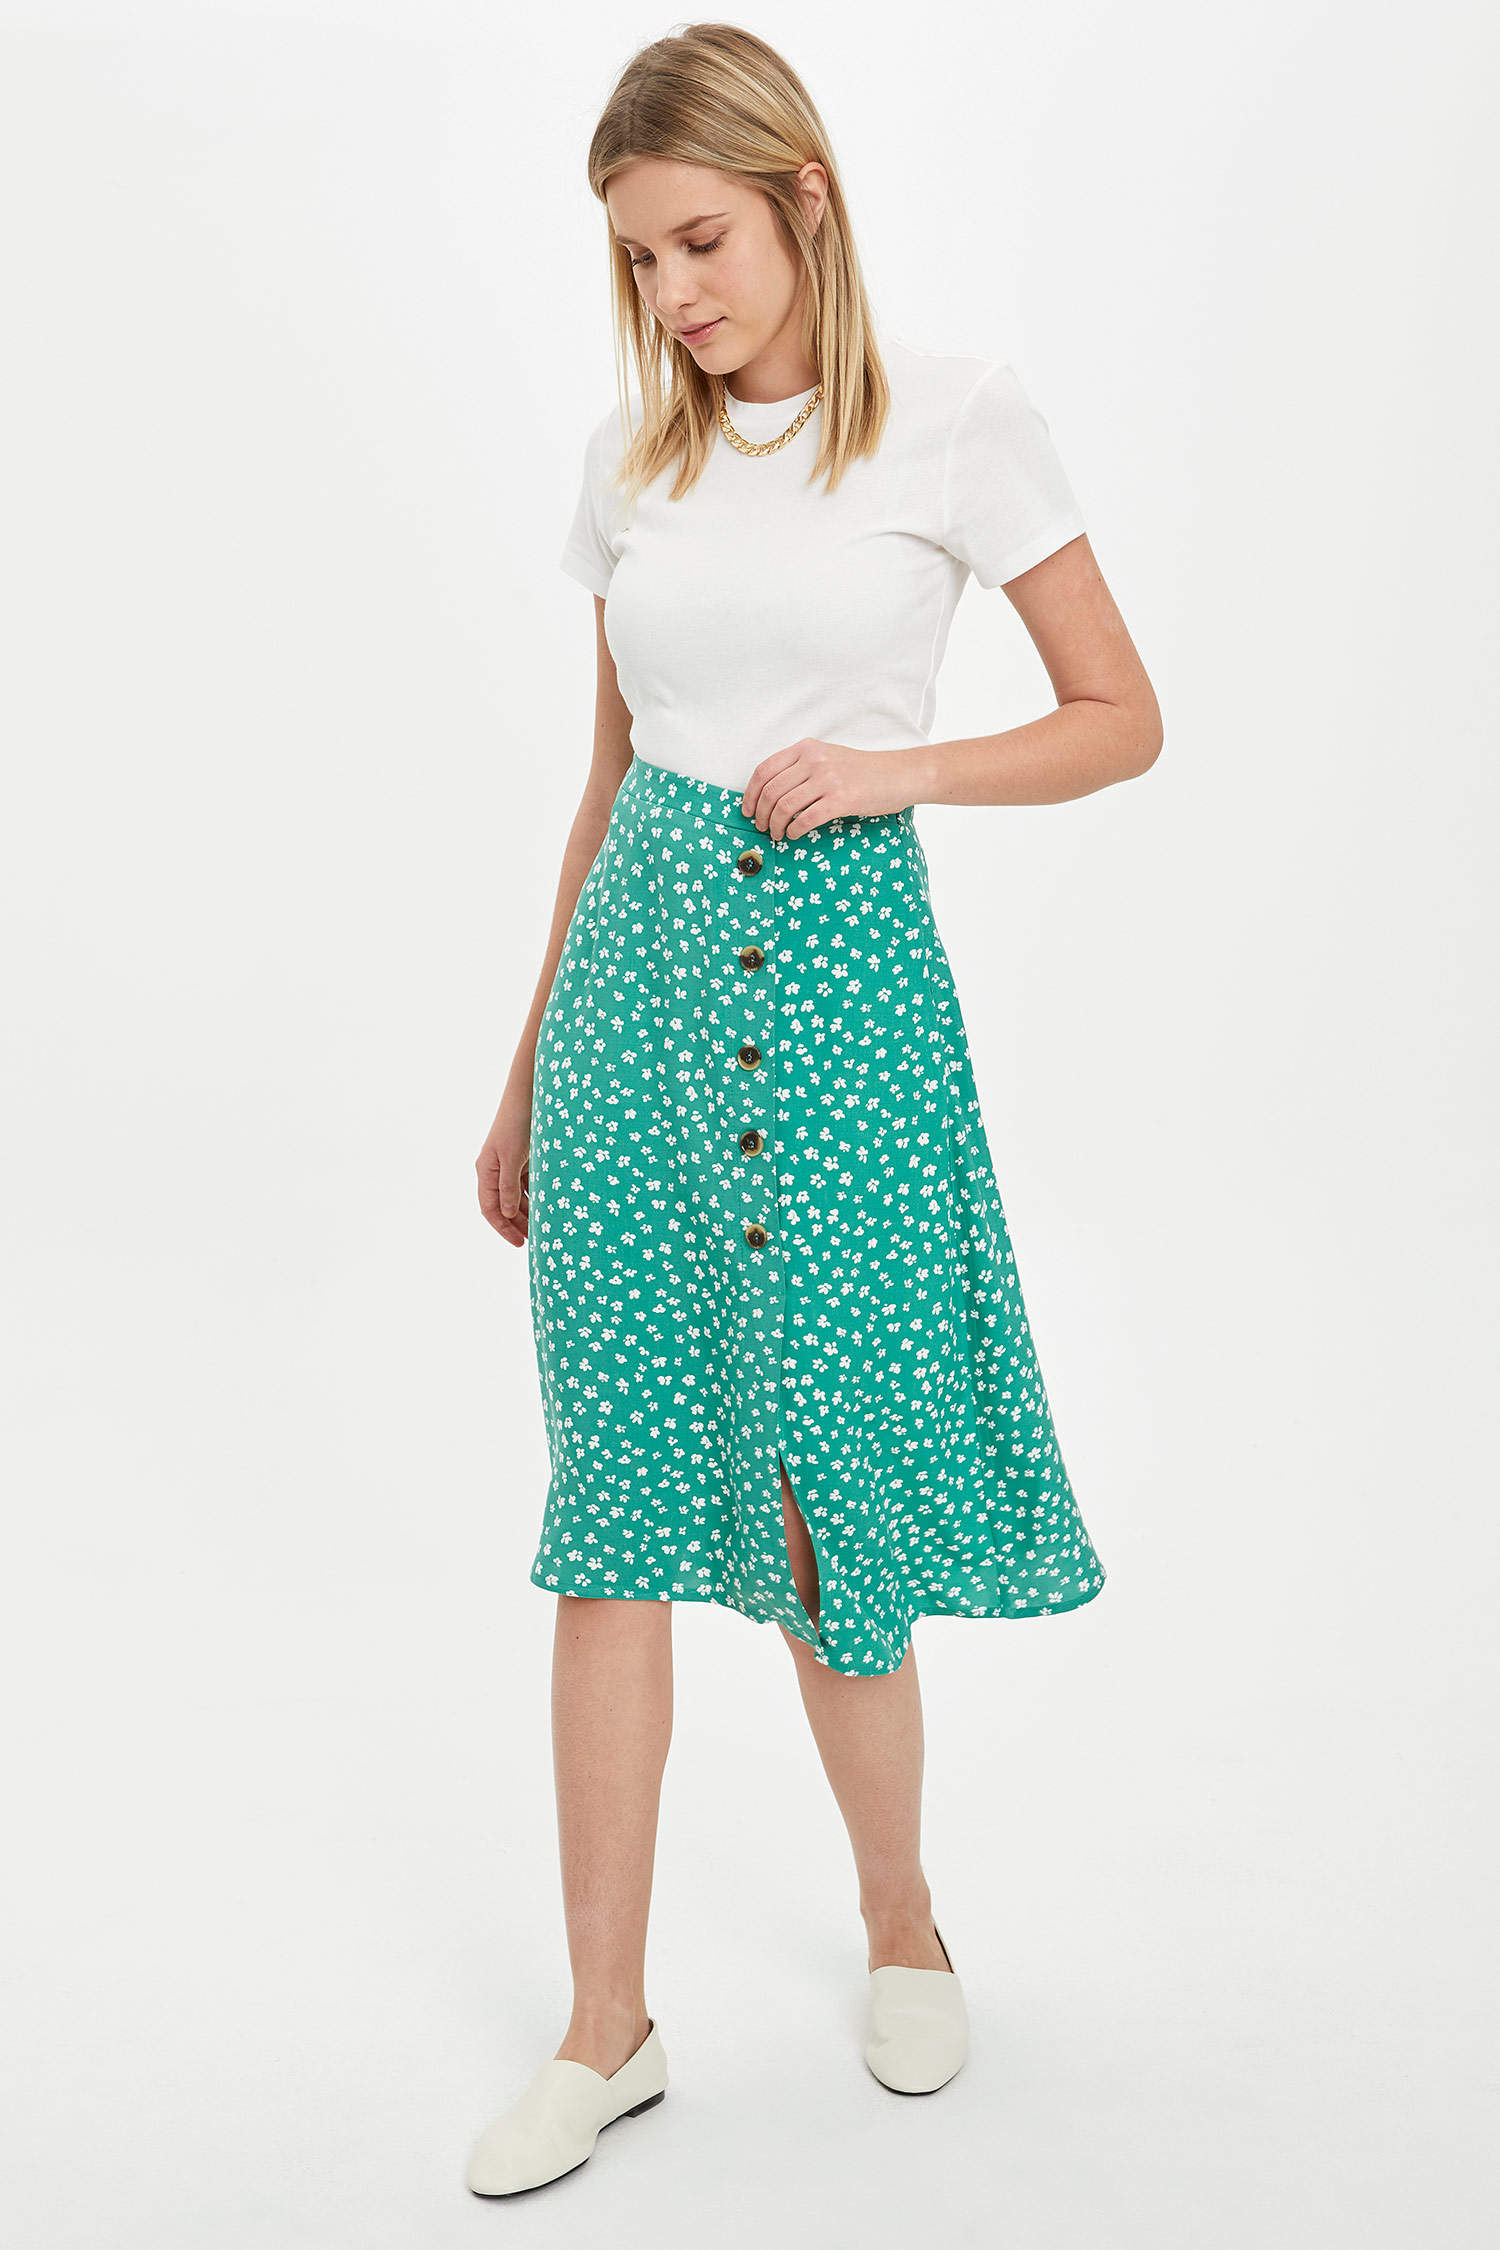 Green WOMAN Button Slit Detailed Patterned Woven Skirt 1258041 | DeFacto